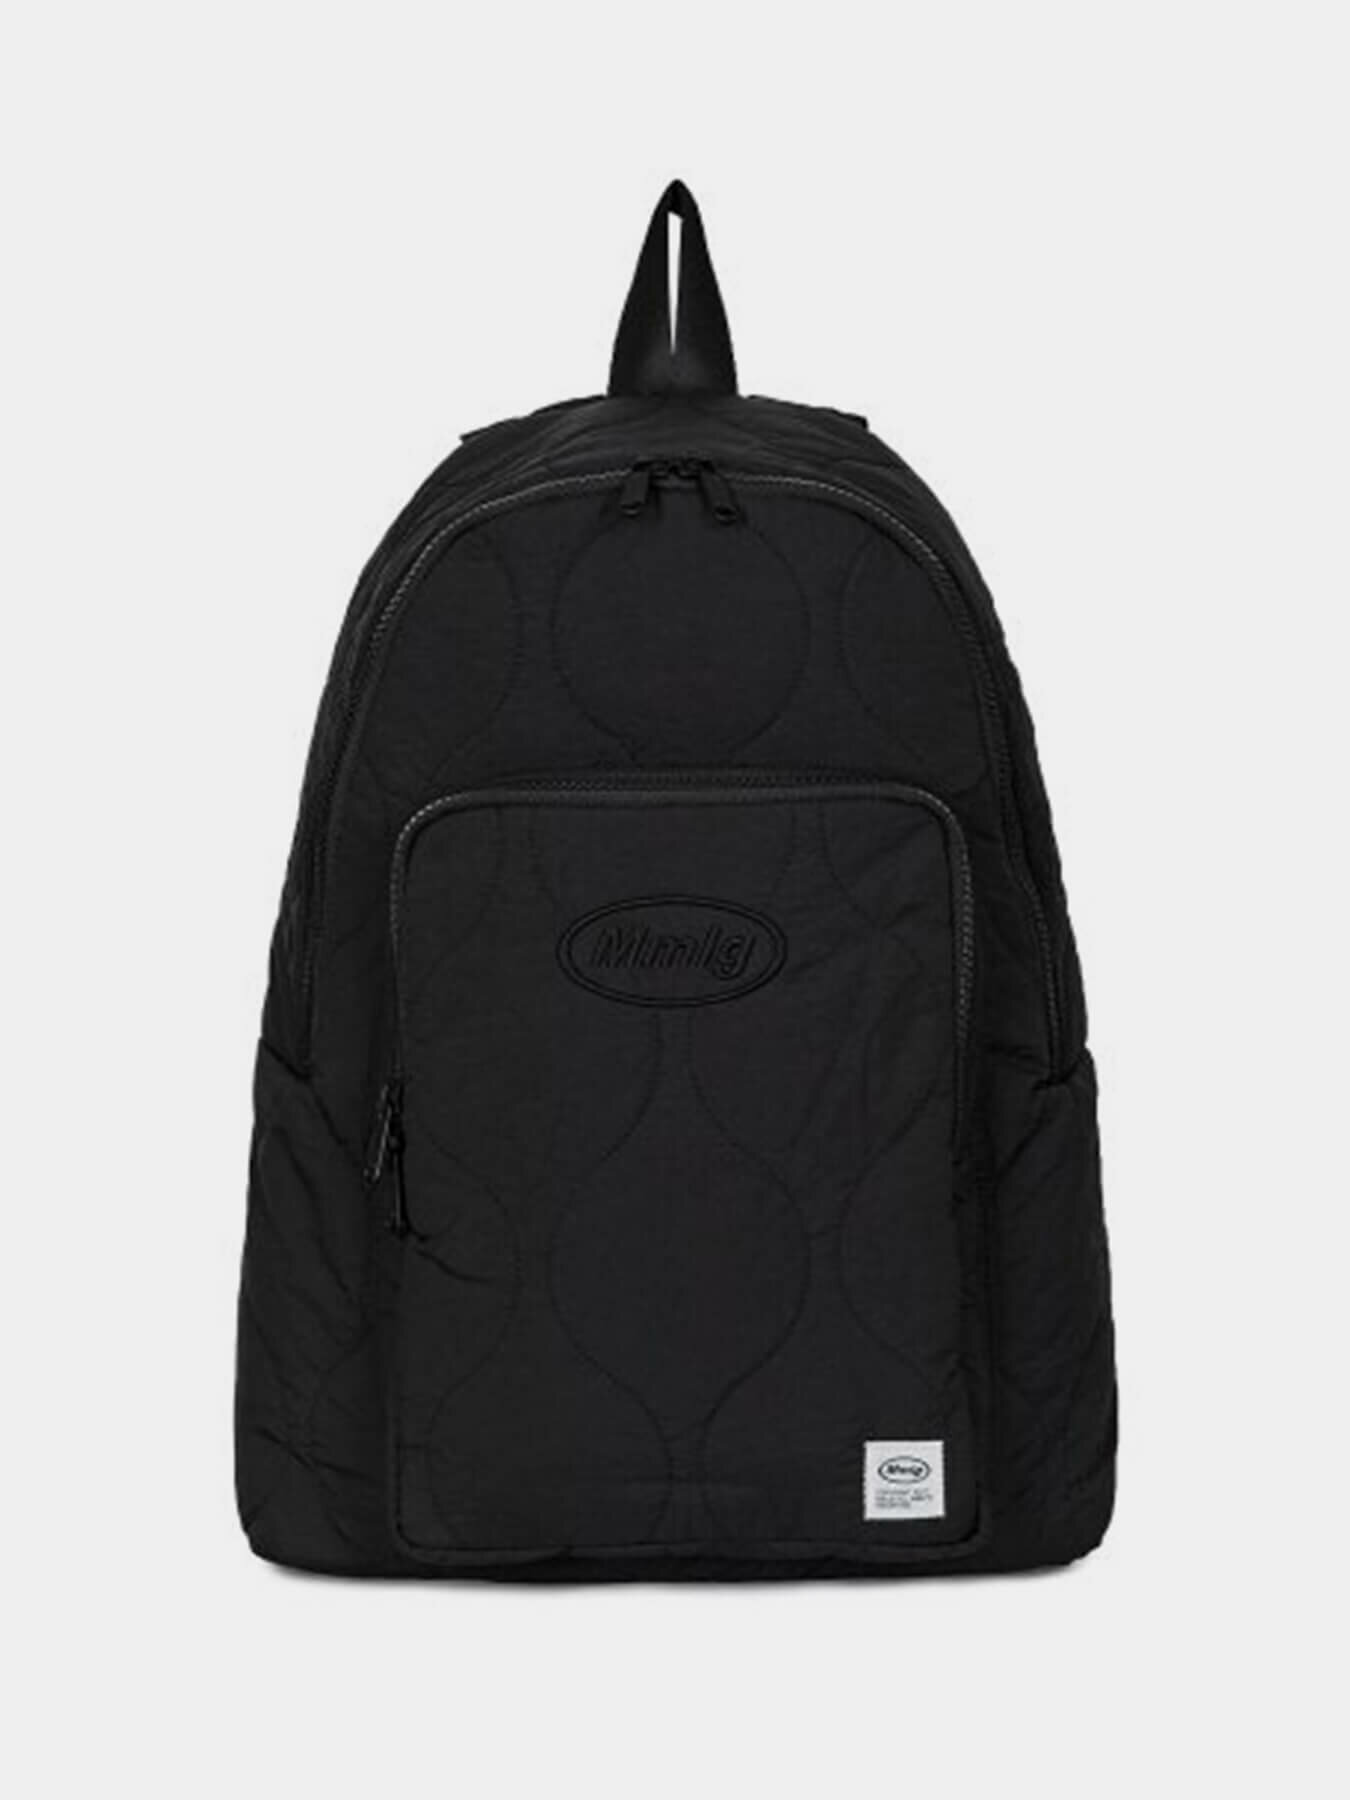 Рюкзак QUILTED mmlg ( one size / black / mmlgbc2a017 )